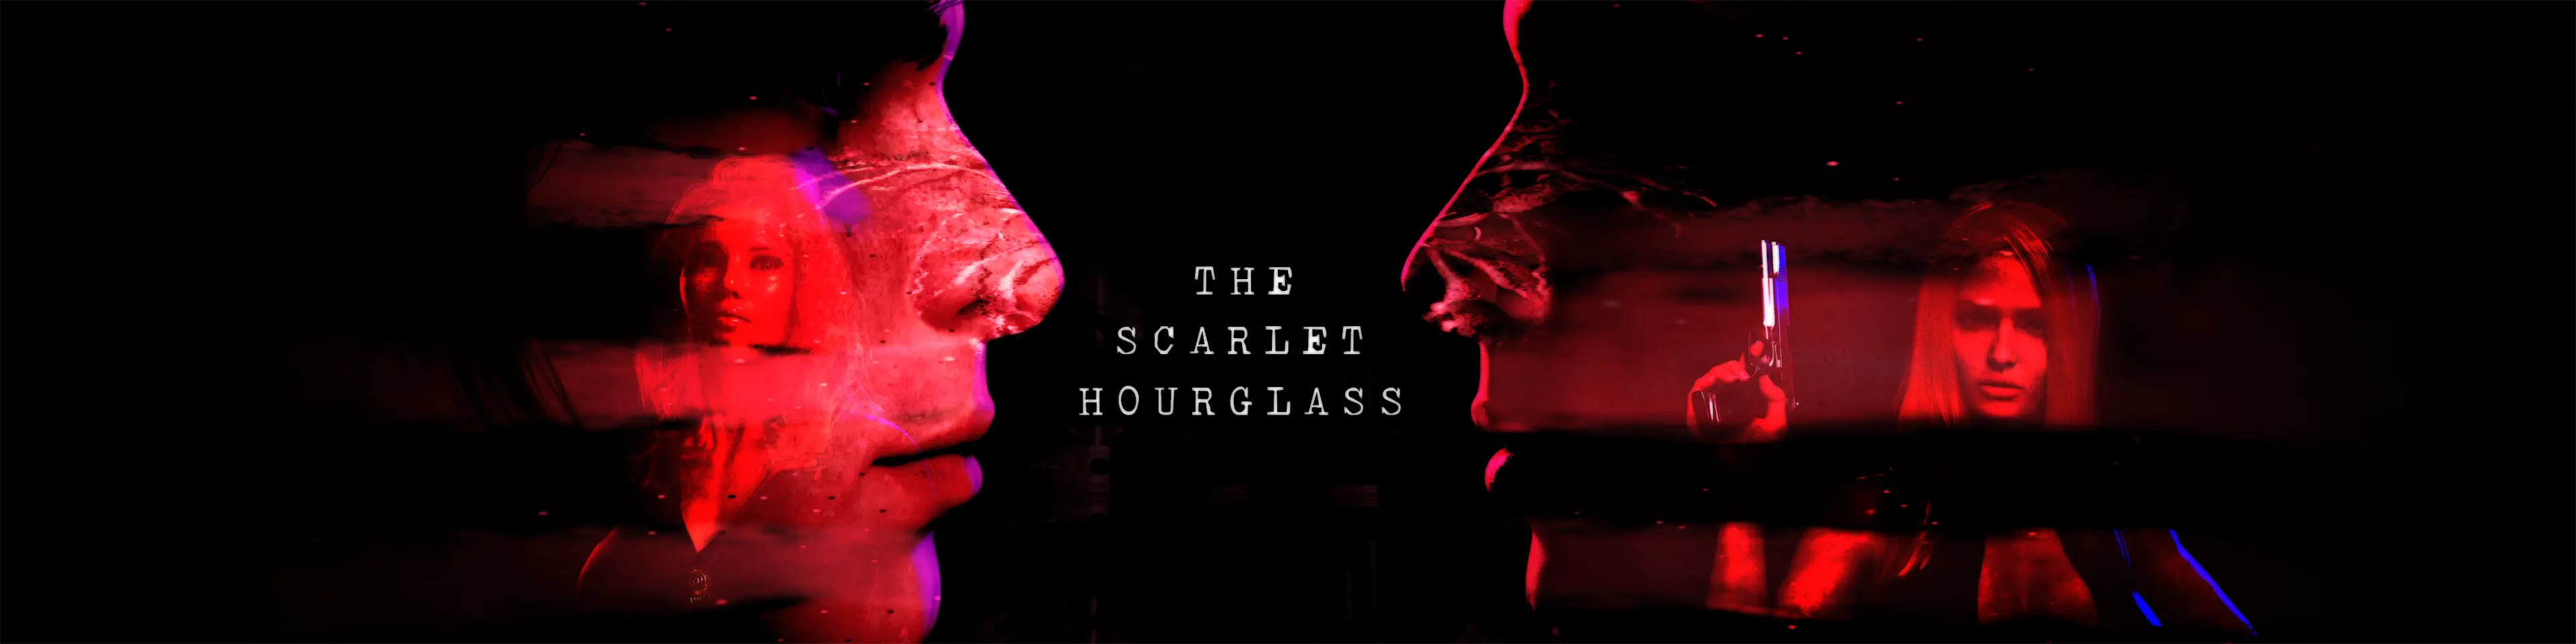 The Scarlet Hourglass [v0.1] main image